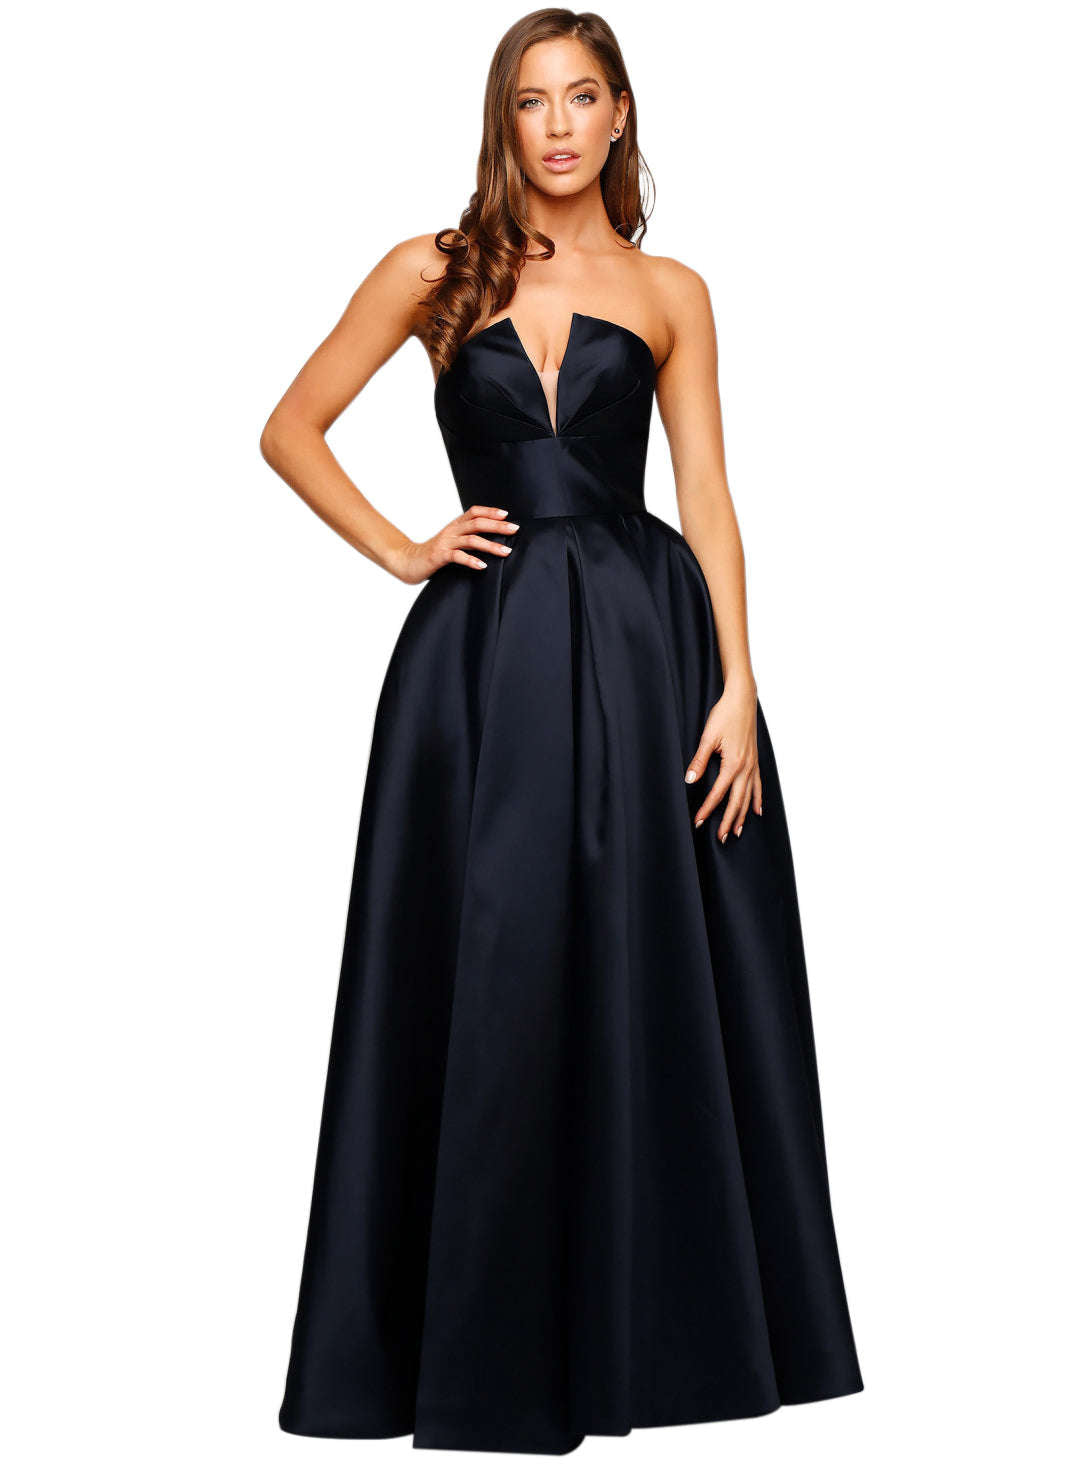 Tinaholy TINAHOLY Lucille Gown TA611 (Navy Blue) - RRP $440 - tinaholy-lucille-gown-ta611-navy-blue---rrp-0-dress-for-a-night-30756954.jpg